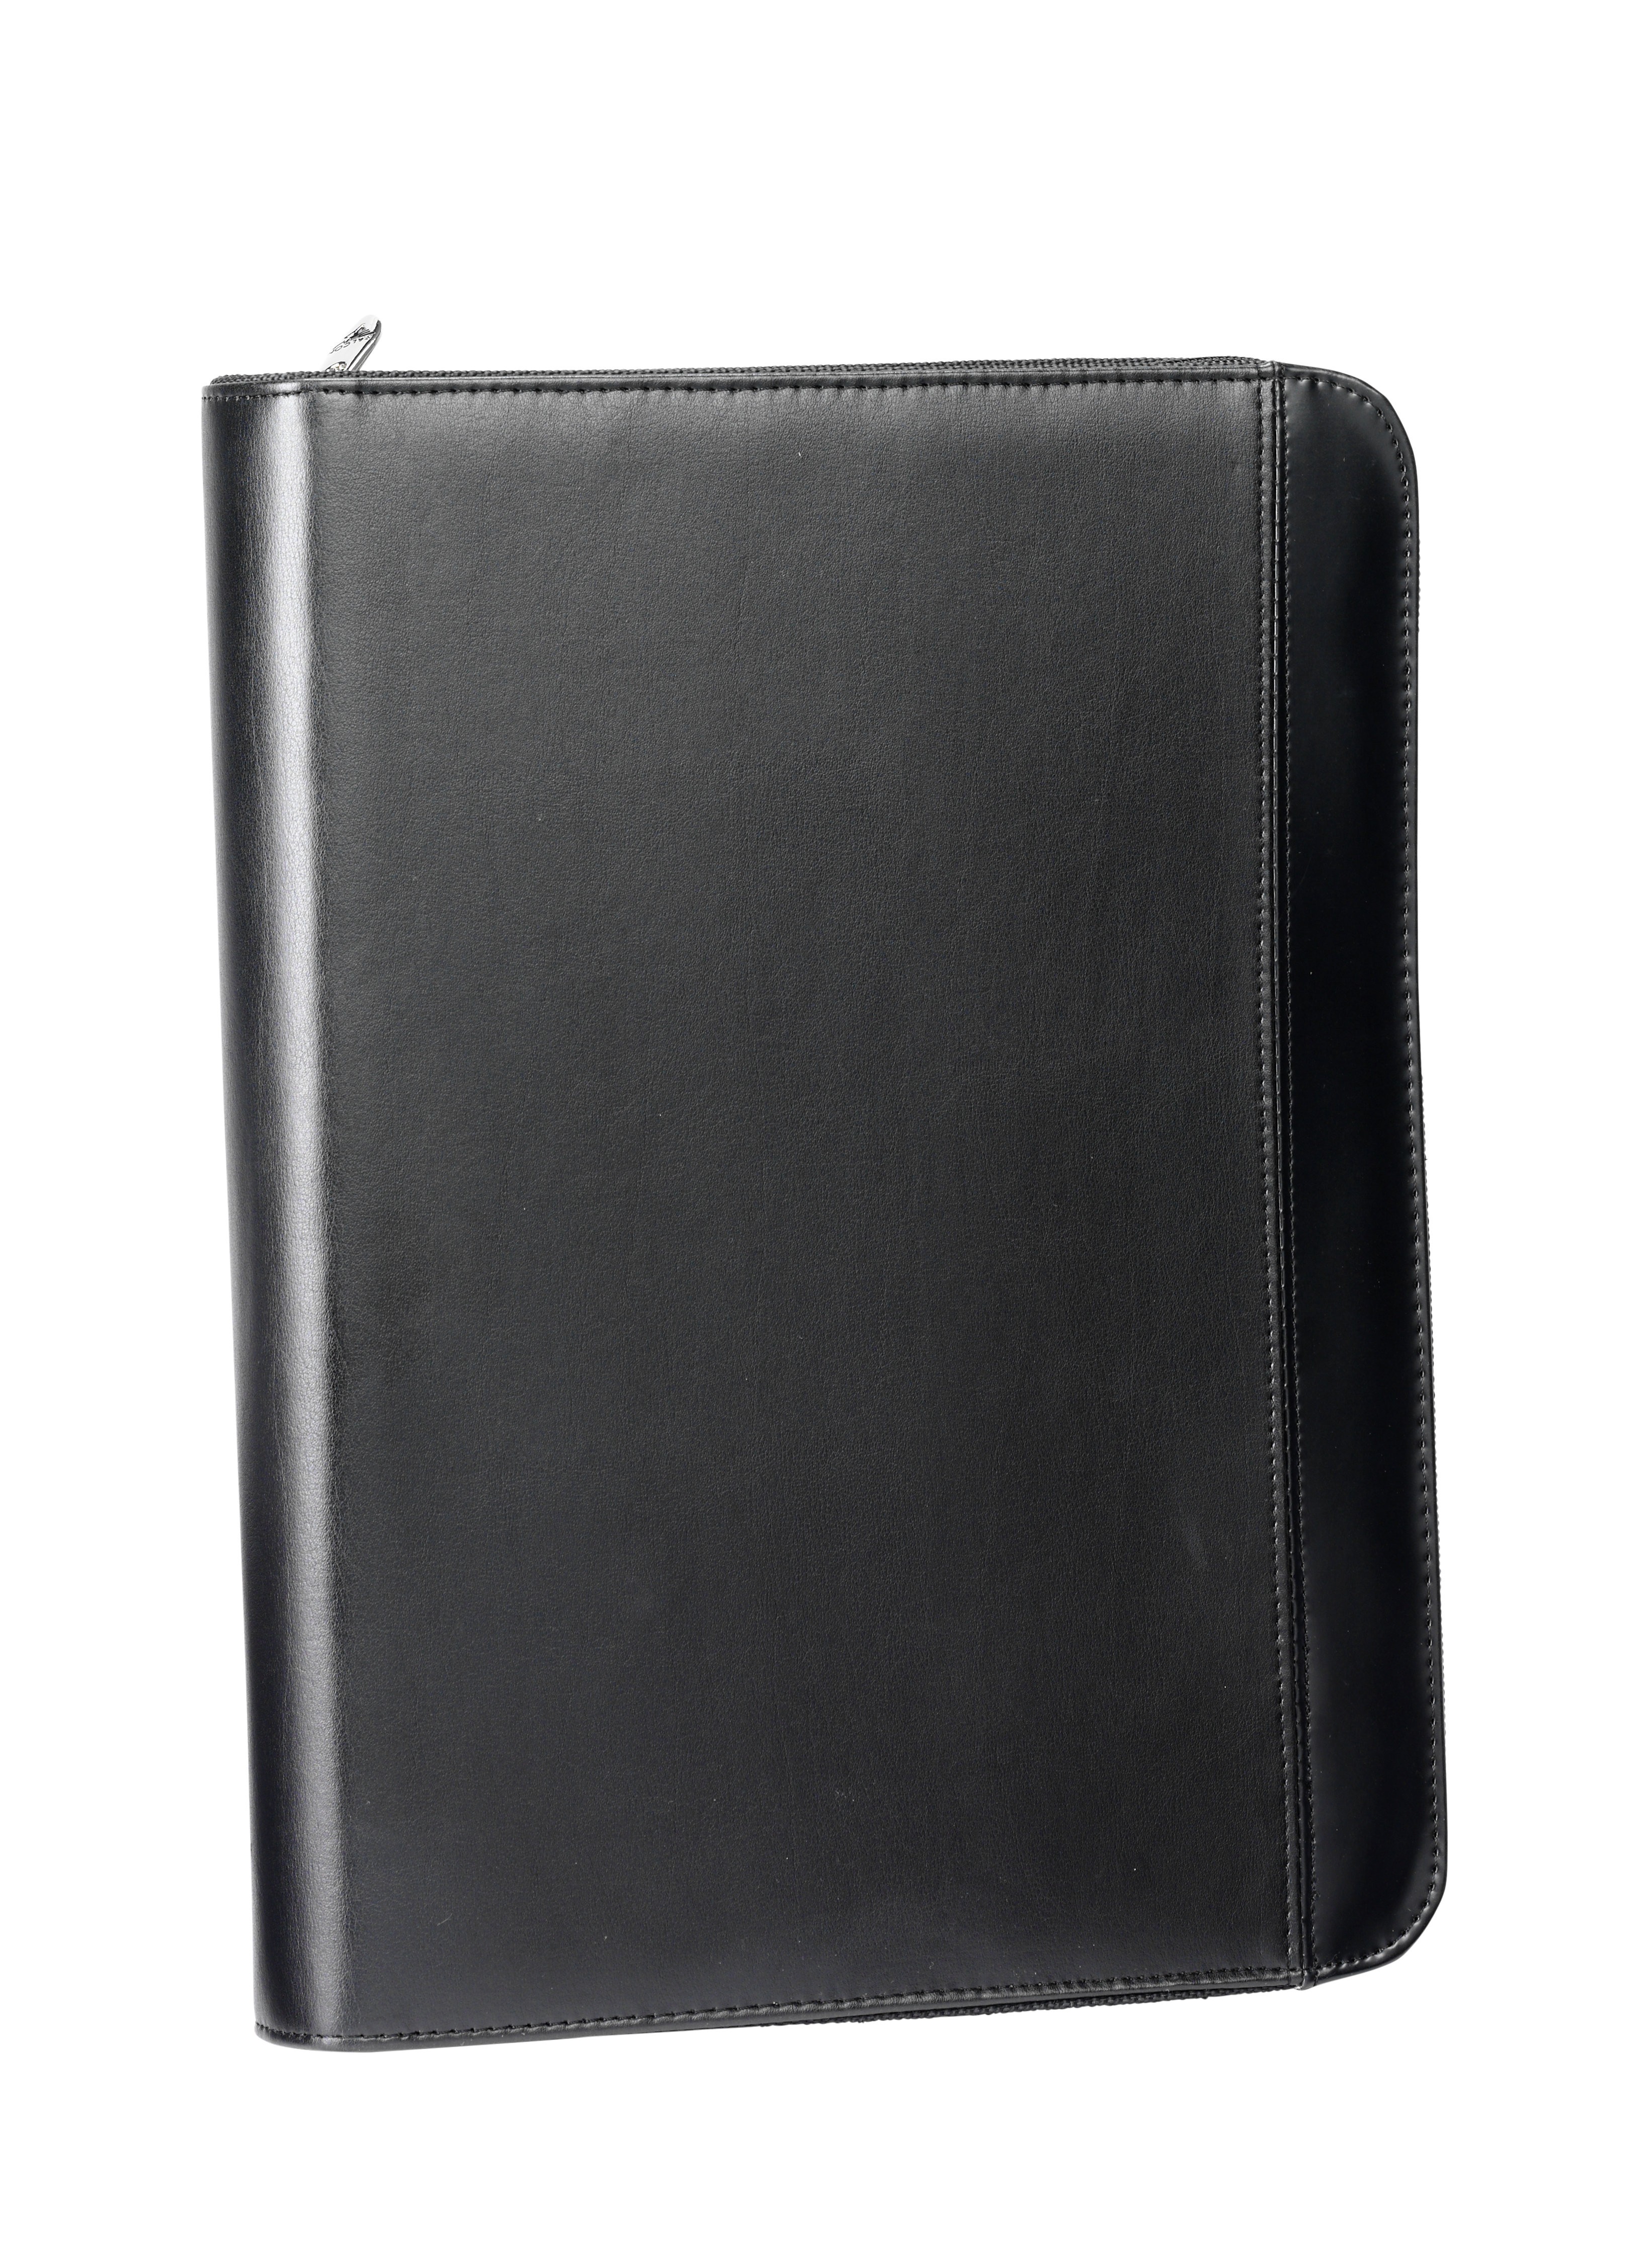 Falcon A4 Faux Leather Zip Around Conference Folder - FI6520 Black 